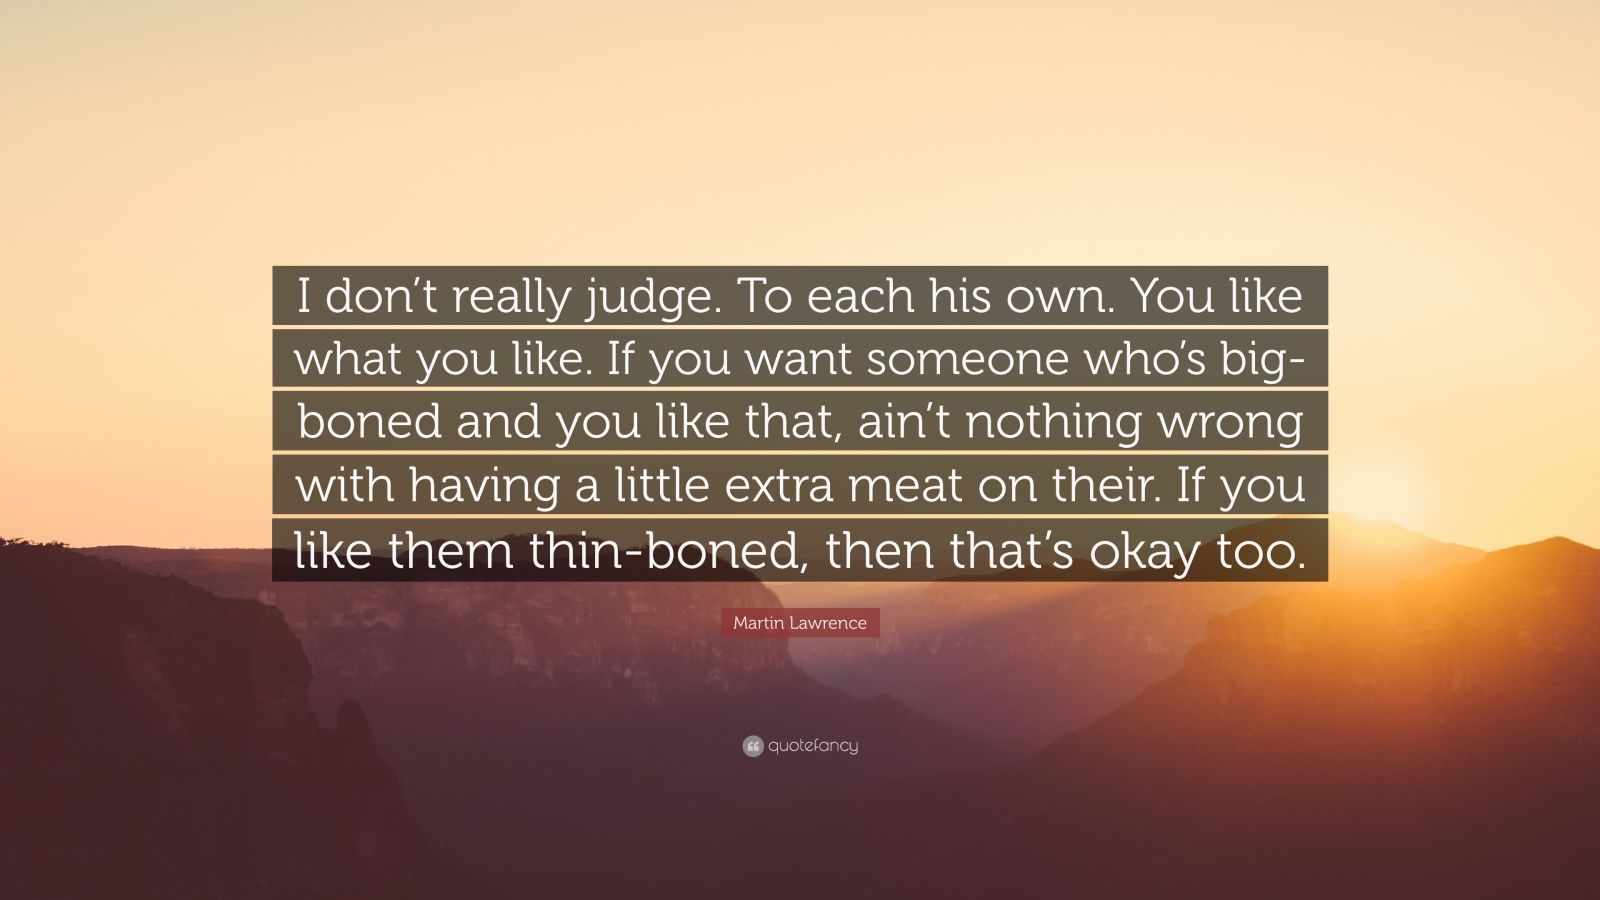 Martin Lawrence quote: I don't really judge. To each his own. You like